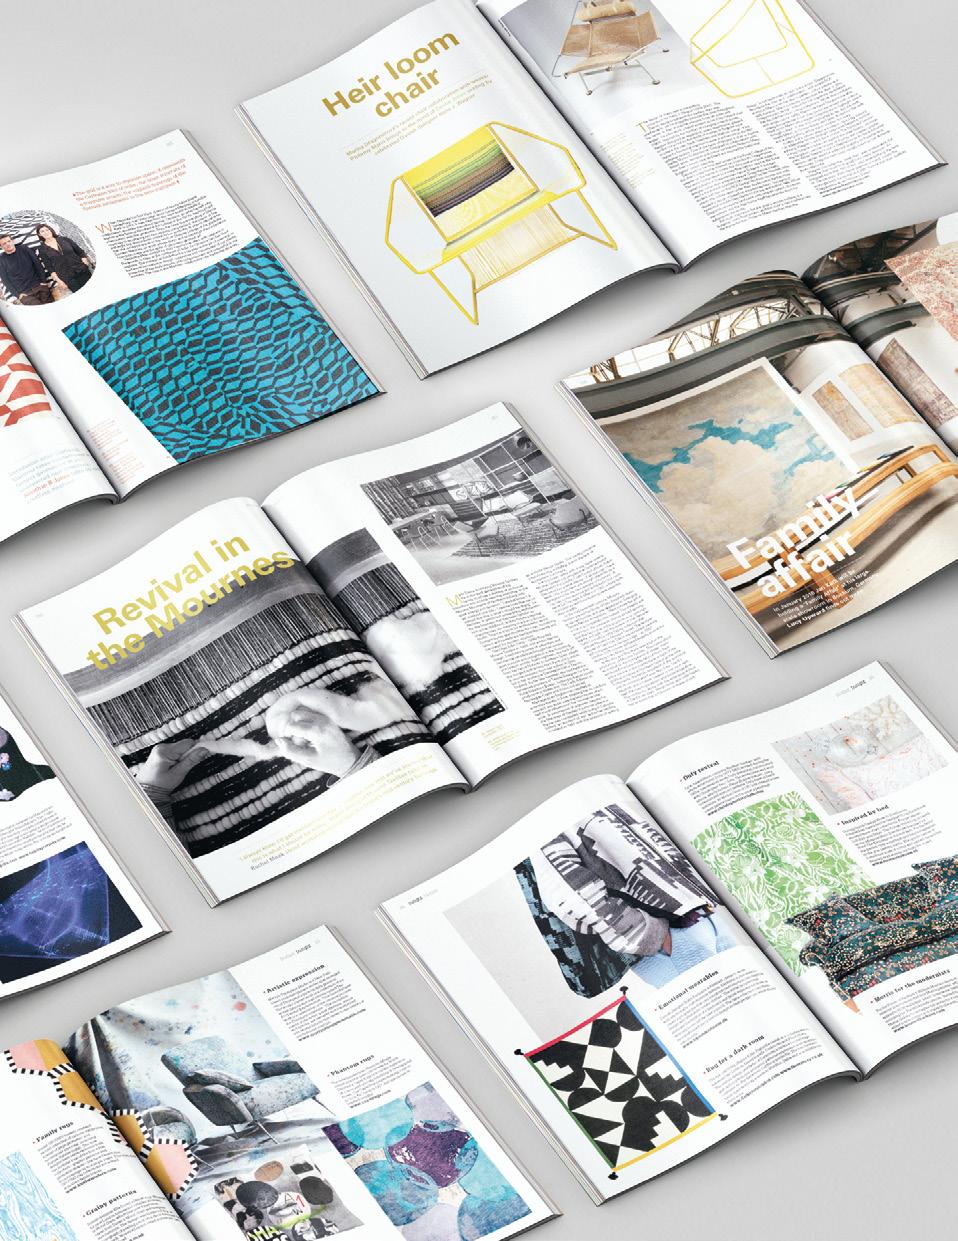 Contents Insight The latest design news, events and trends. Hotlist, the COVER Calendar and trend pages showcase what is happening at the forefront of carpet and textile design.